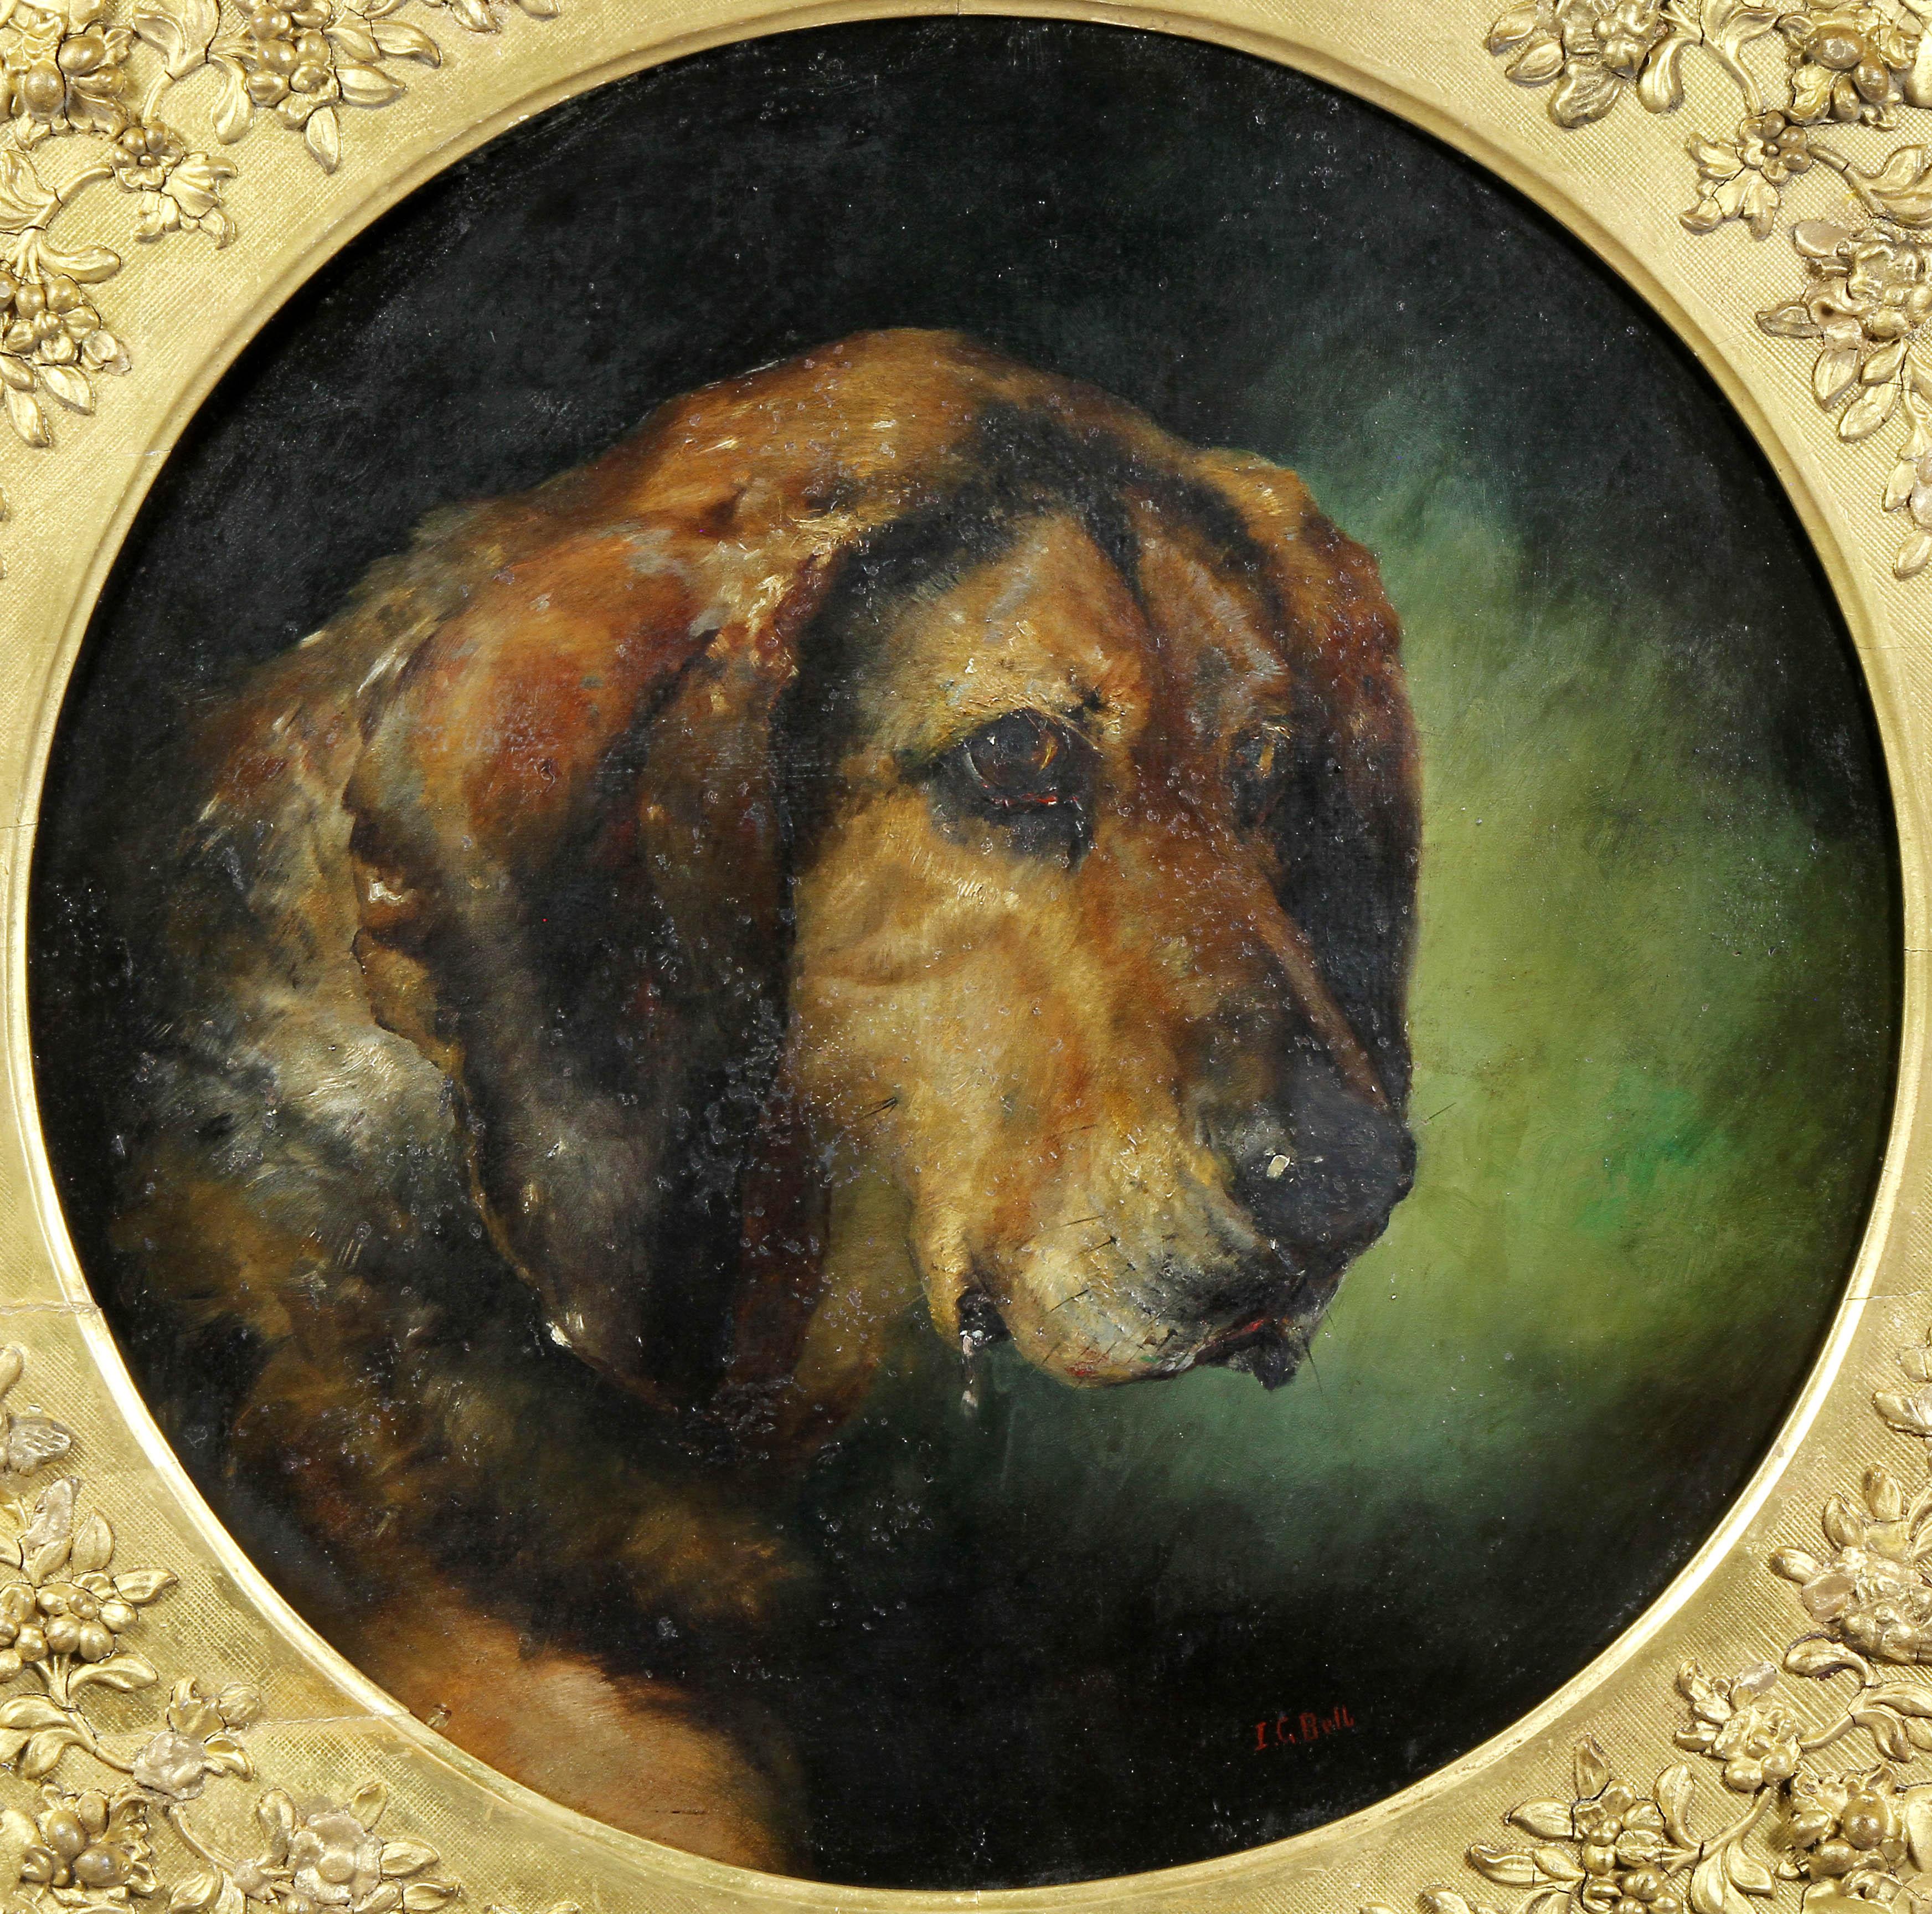 The circular painting of a dog signed I.G Bell. In a decorative Victorian frame. Estate of William Hodgins.